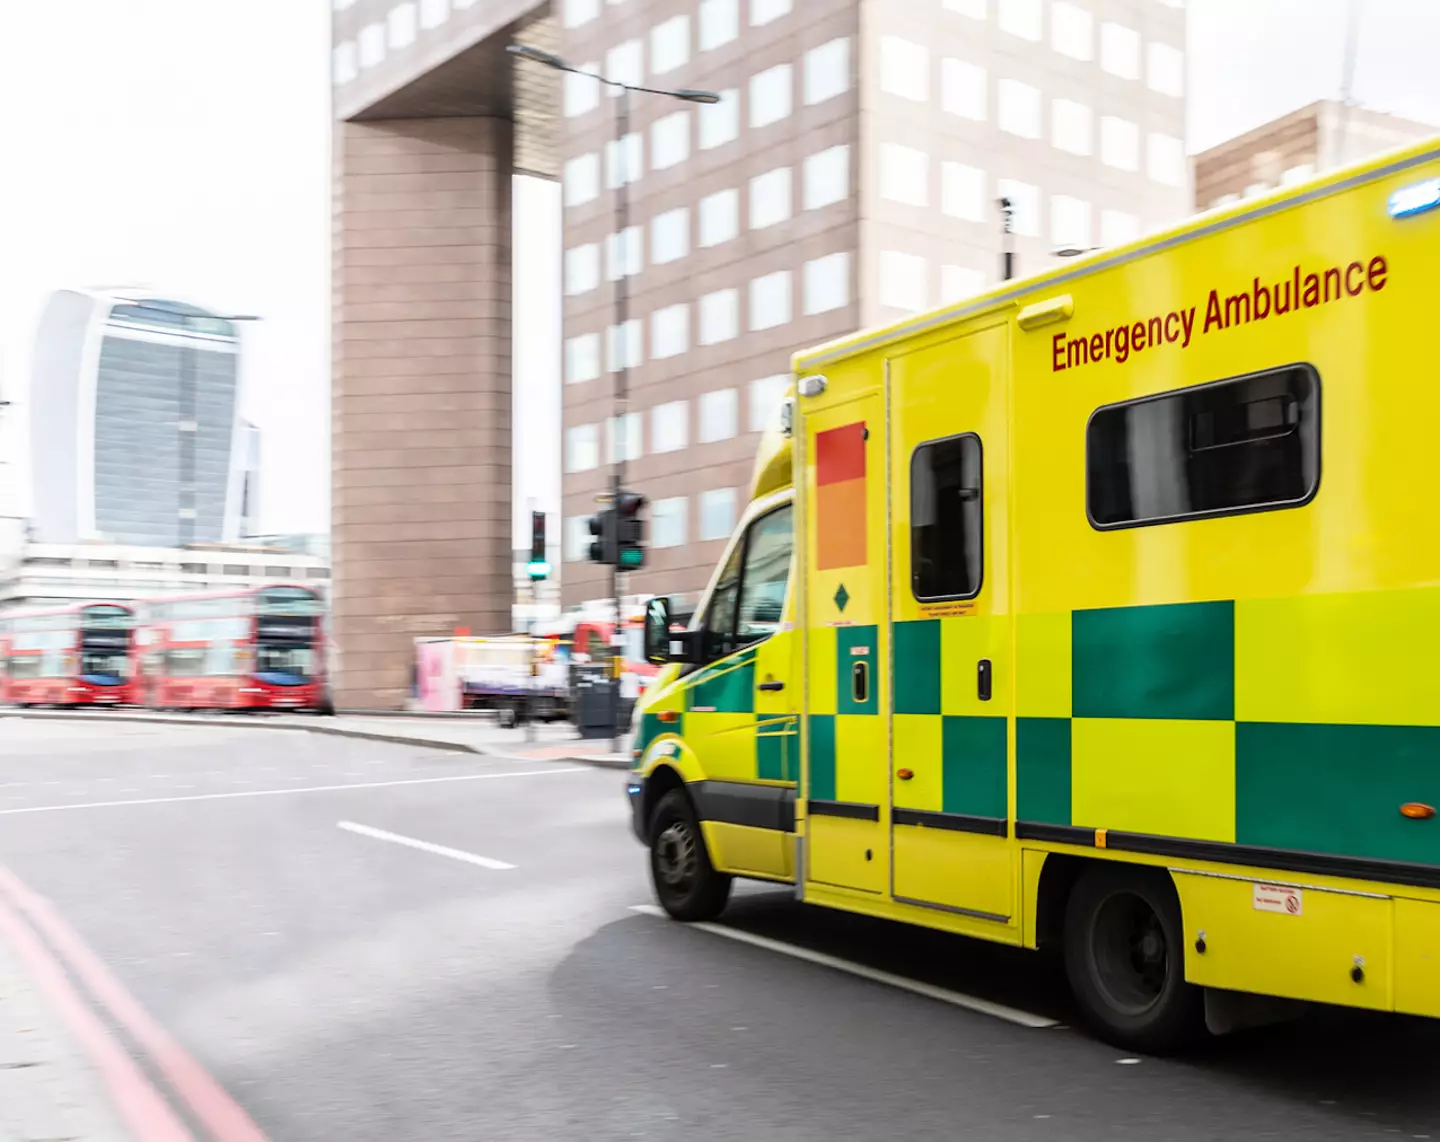 The ambulance service has since issued an apology.